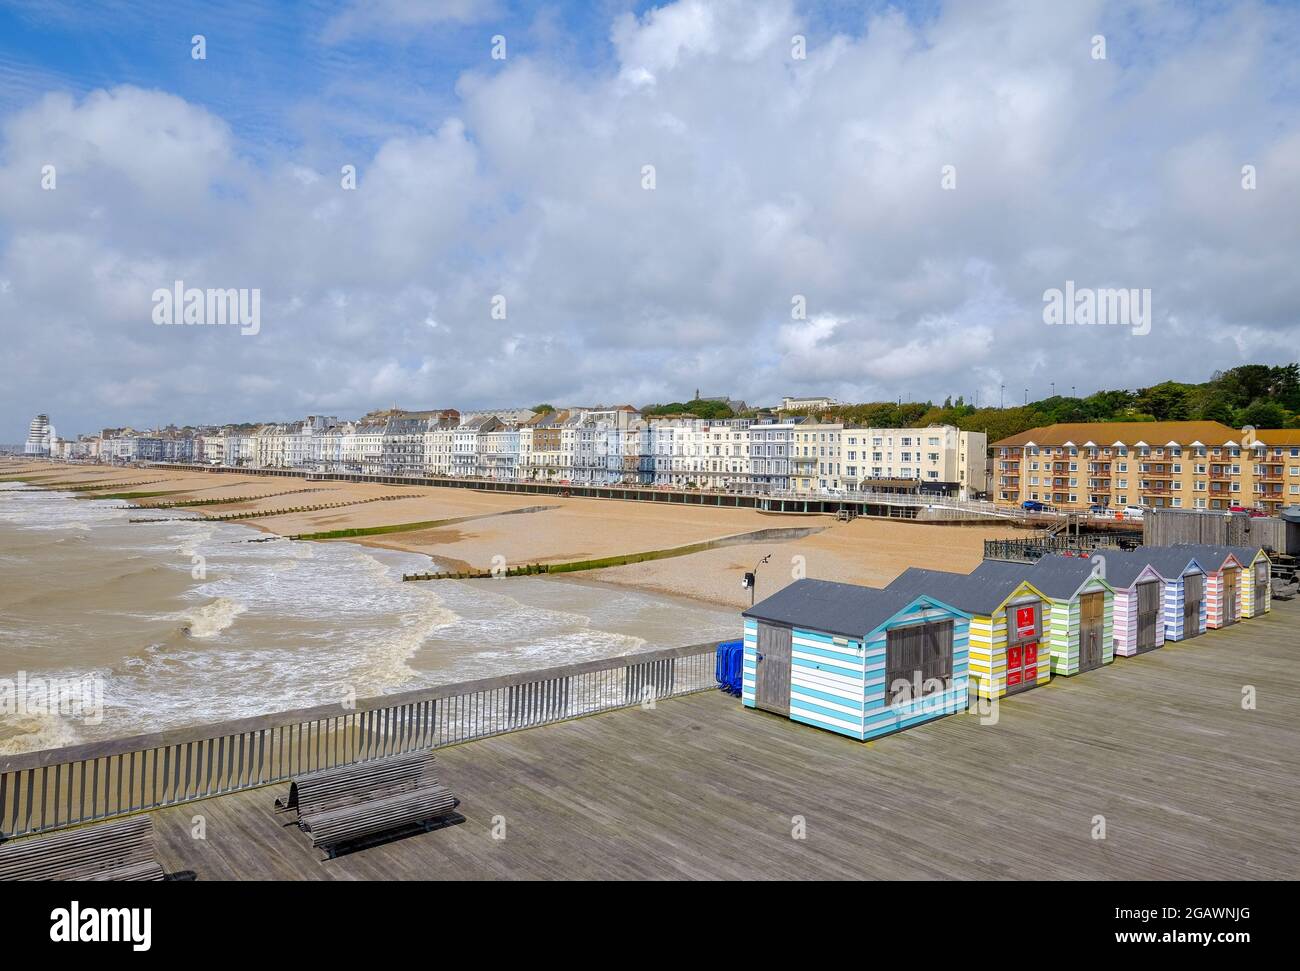 Hastings Beach and Pier, Hastling, East Sussex, Regno Unito Foto Stock